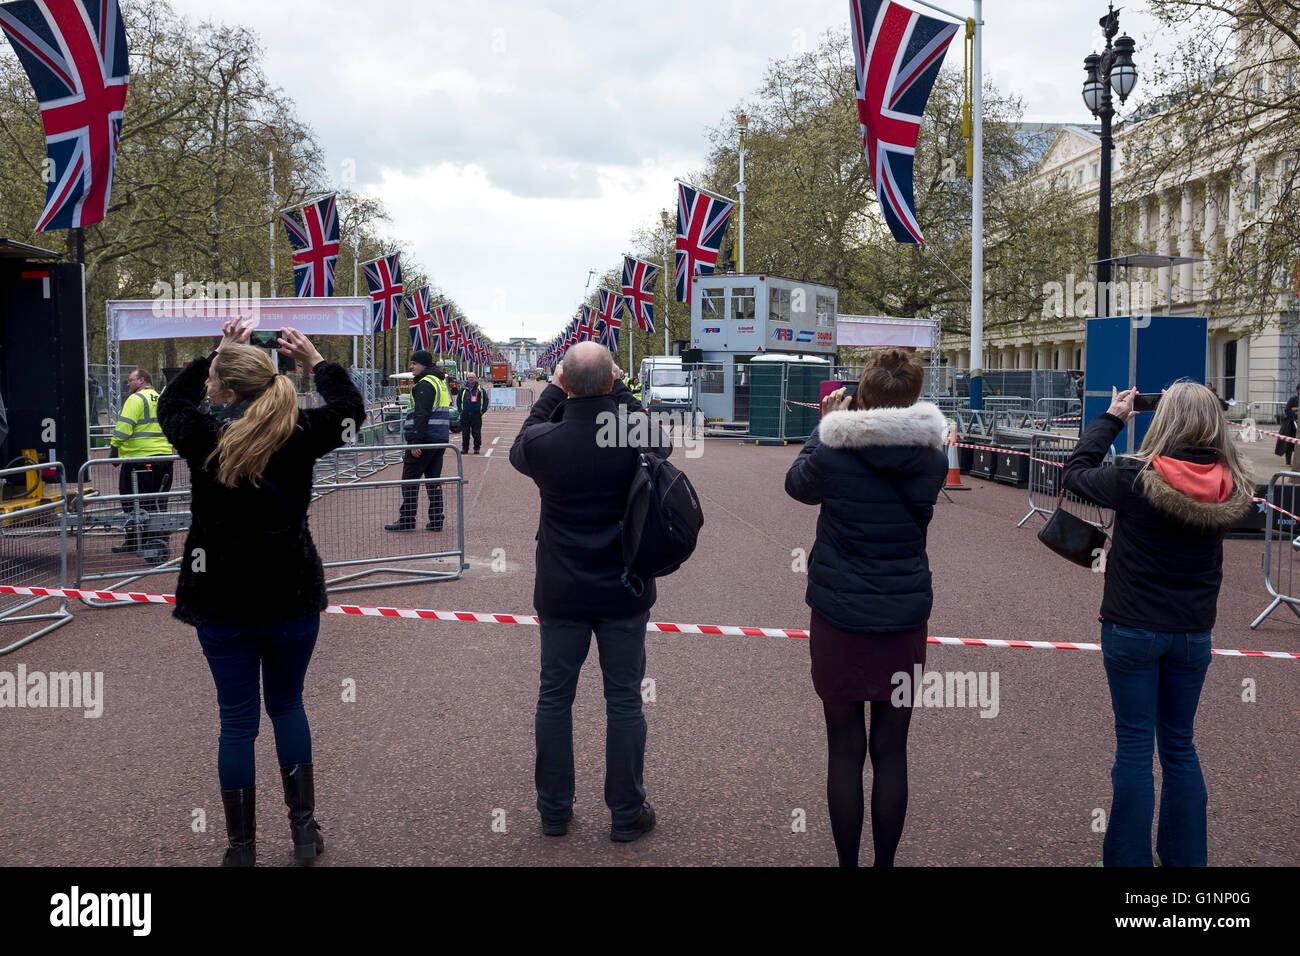 People photographing the preparations at the finish for the 2016 London Marathon Stock Photo